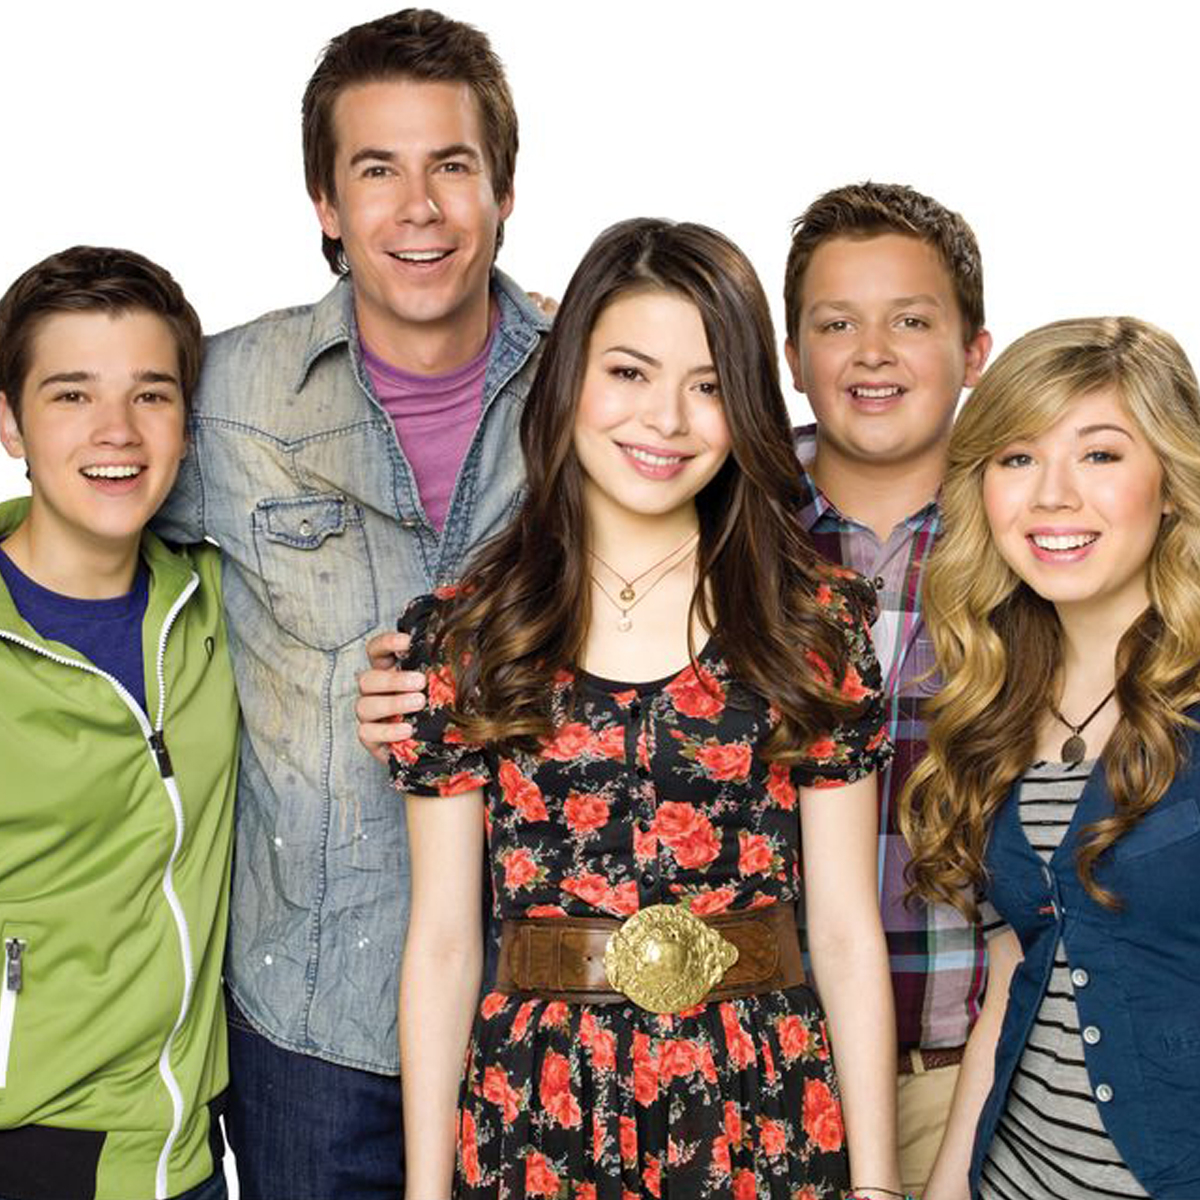 https://akns-images.eonline.com/eol_images/Entire_Site/20201110/rs_1200x1200-201210132815-1200-icarly-cast.jpg?fit=around%7C1080:1080&output-quality=90&crop=1080:1080;center,top